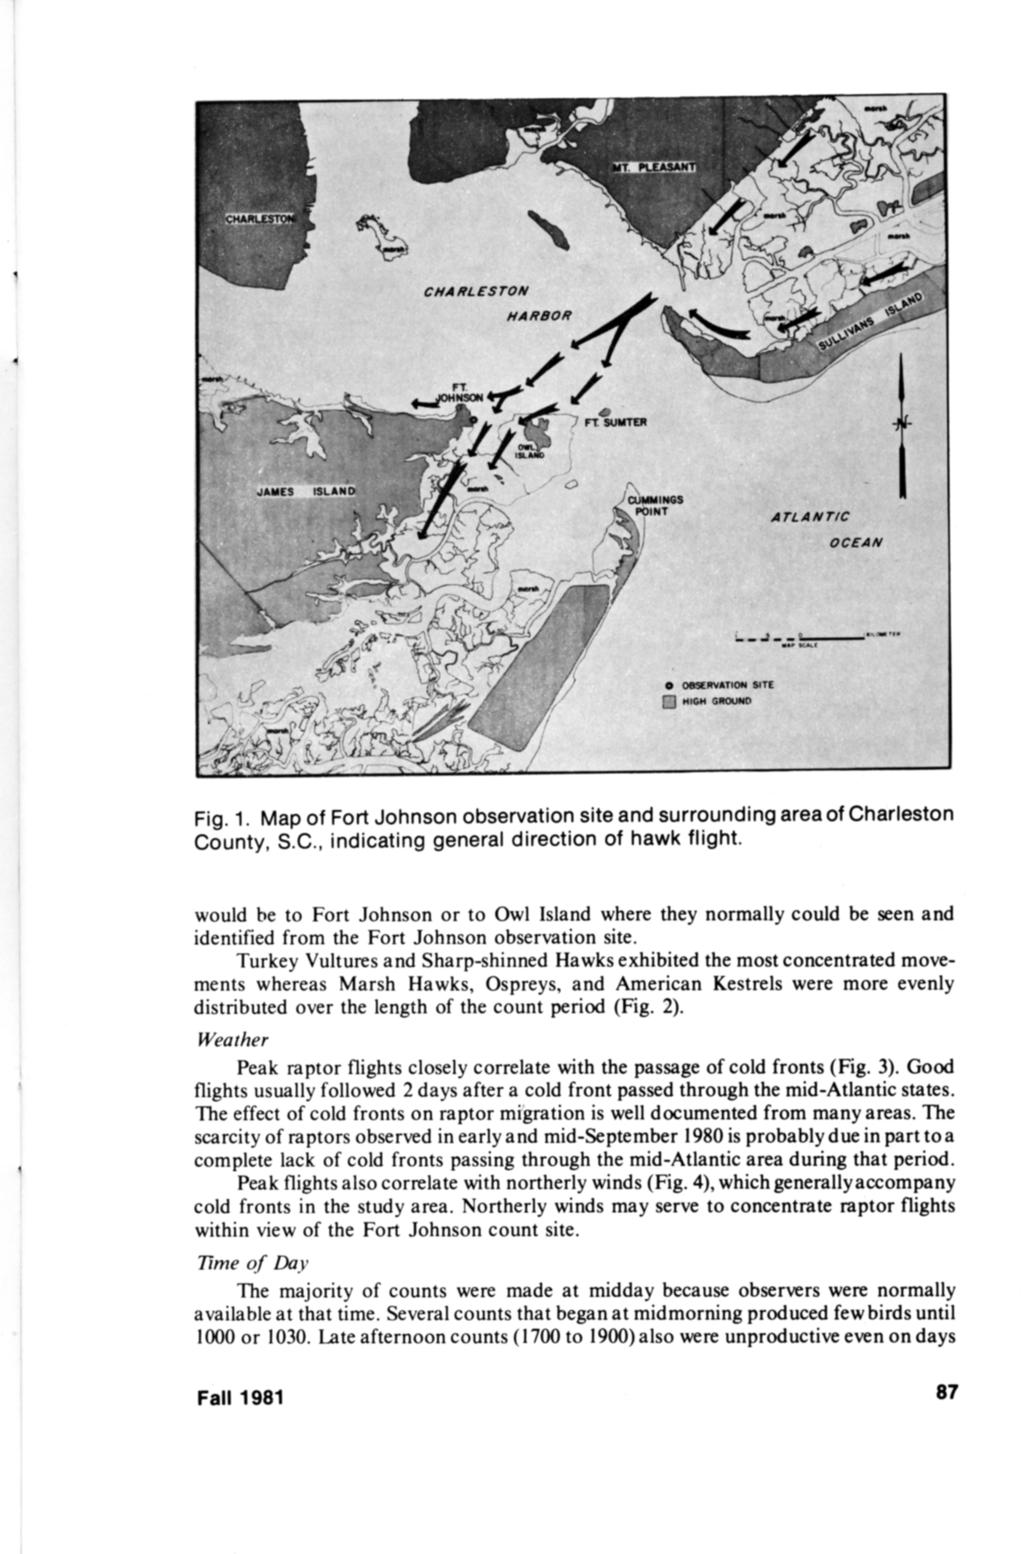 Fig. 1. Map of Fort Johnson observation site and surrounding area of Charleston County, S.C., indicating general direction of hawk flight.